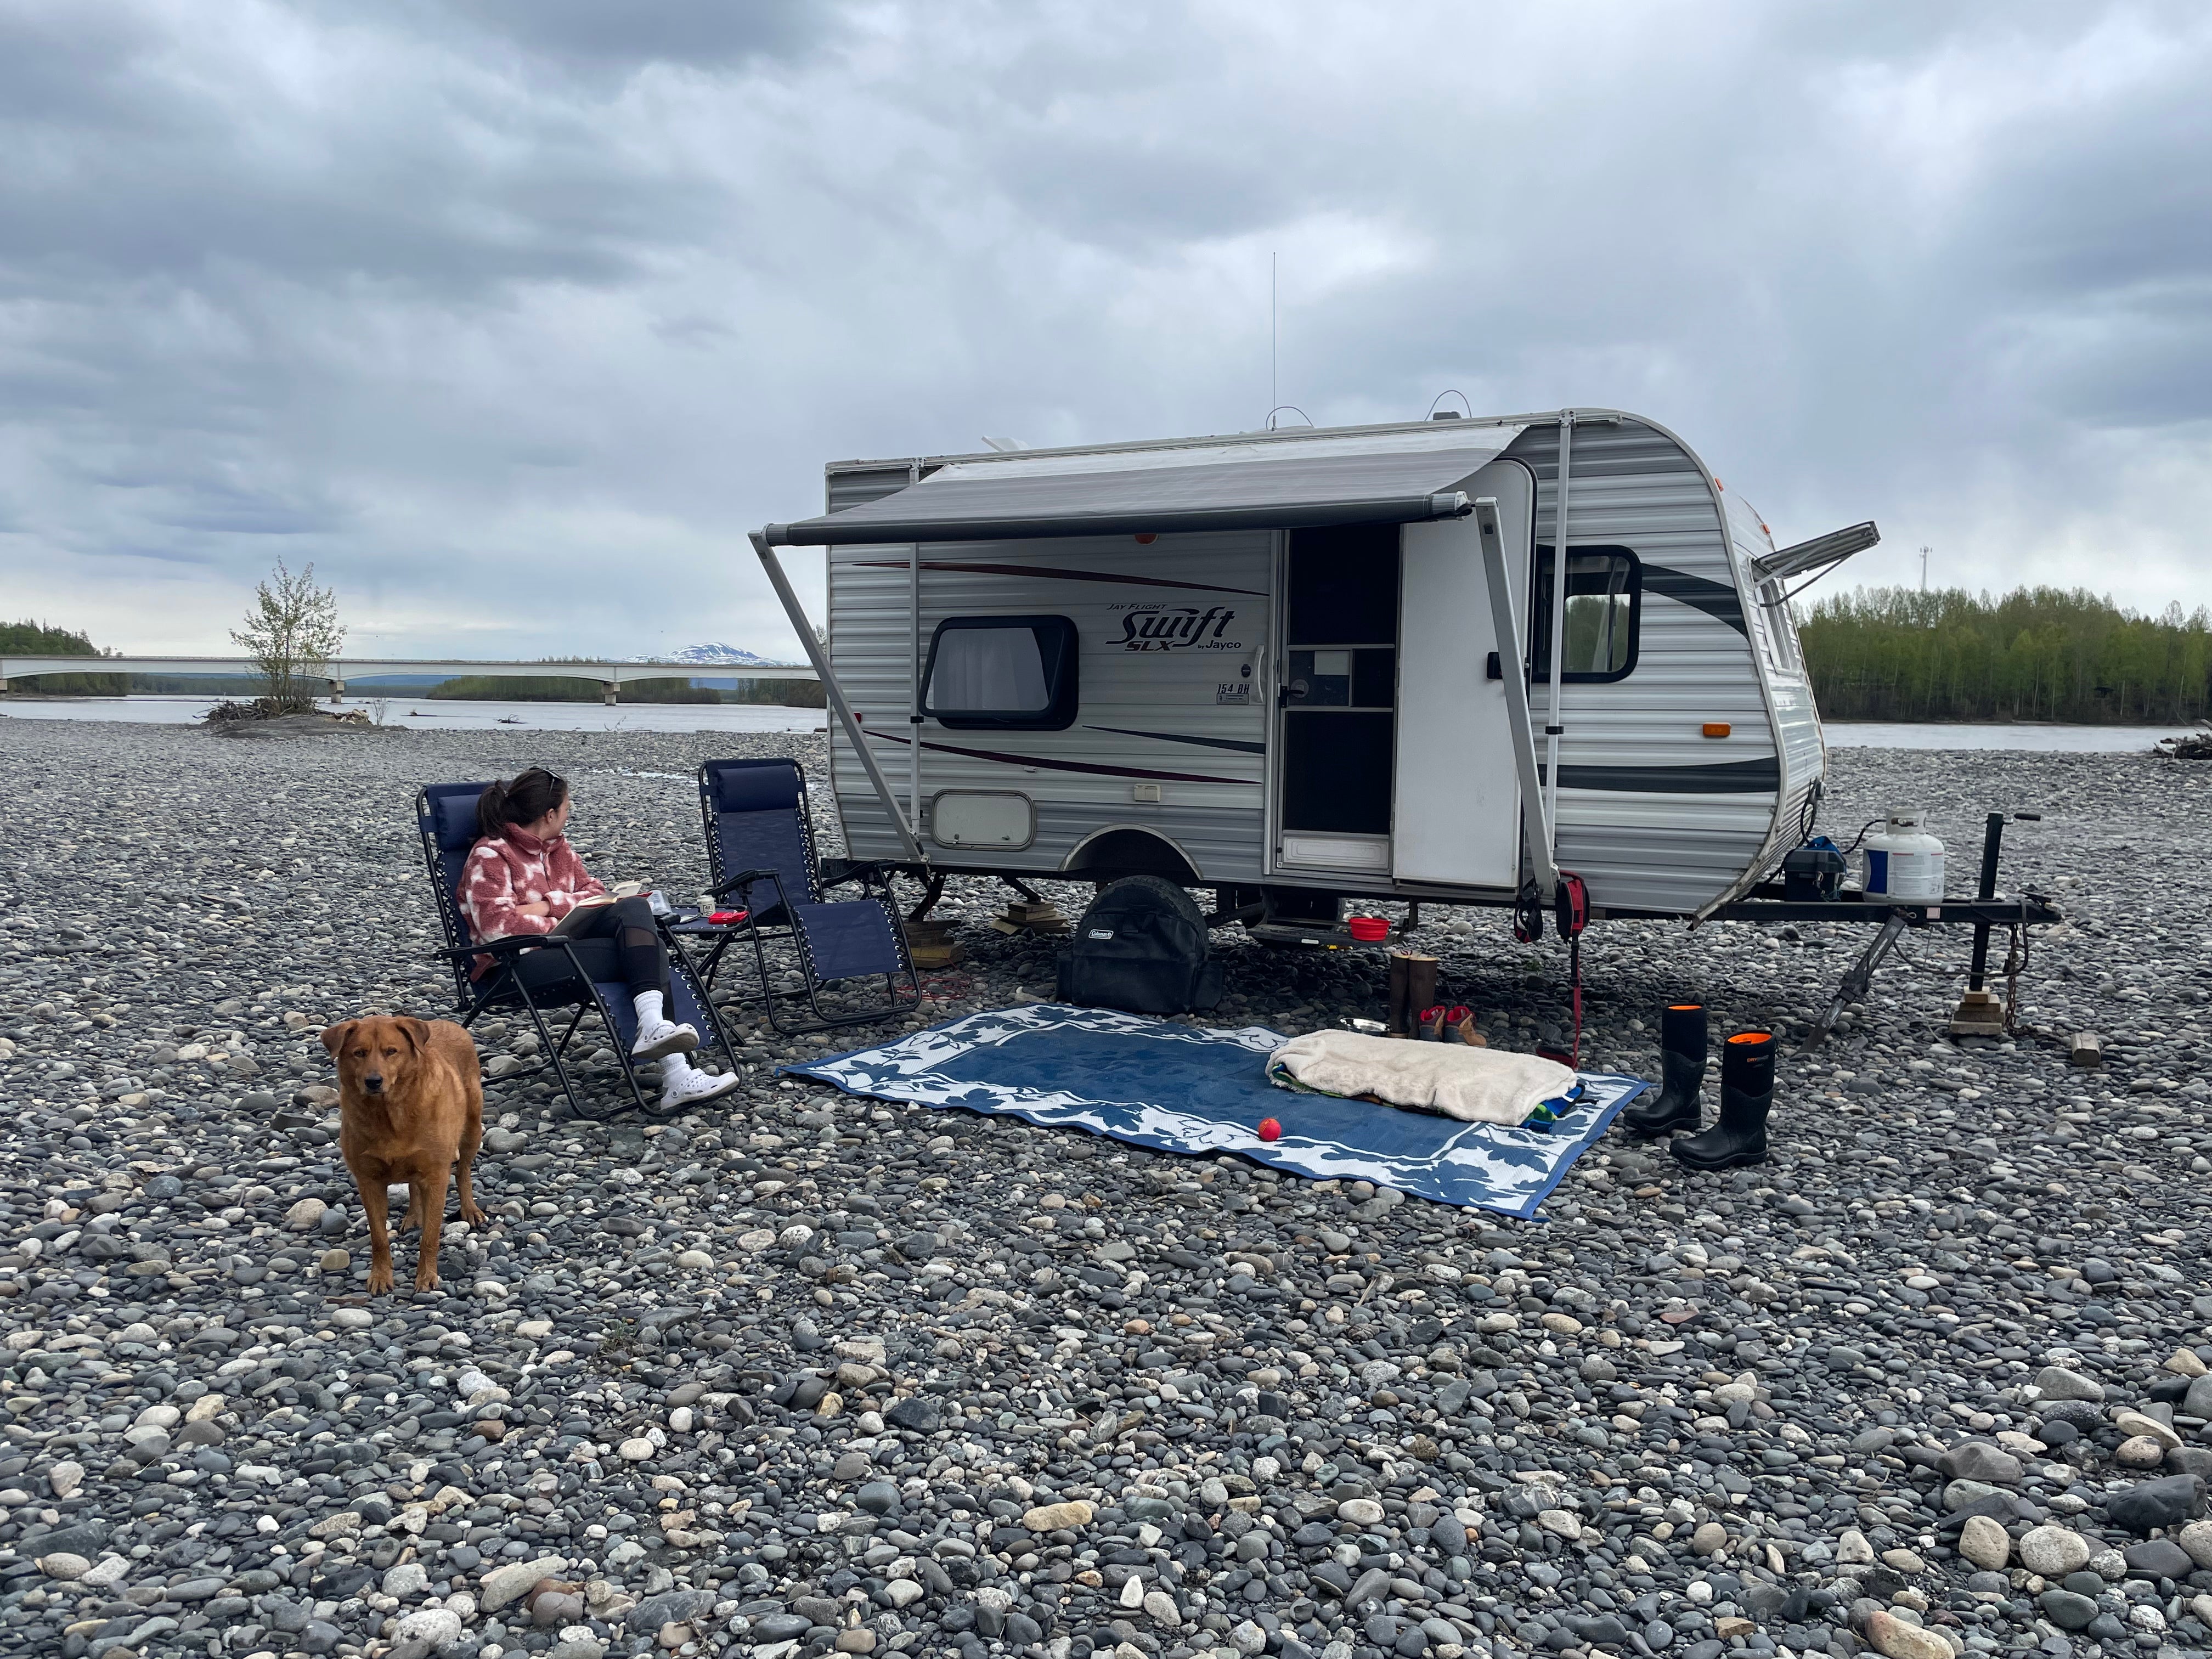 Camper submitted image from Susitna River Banks - 1